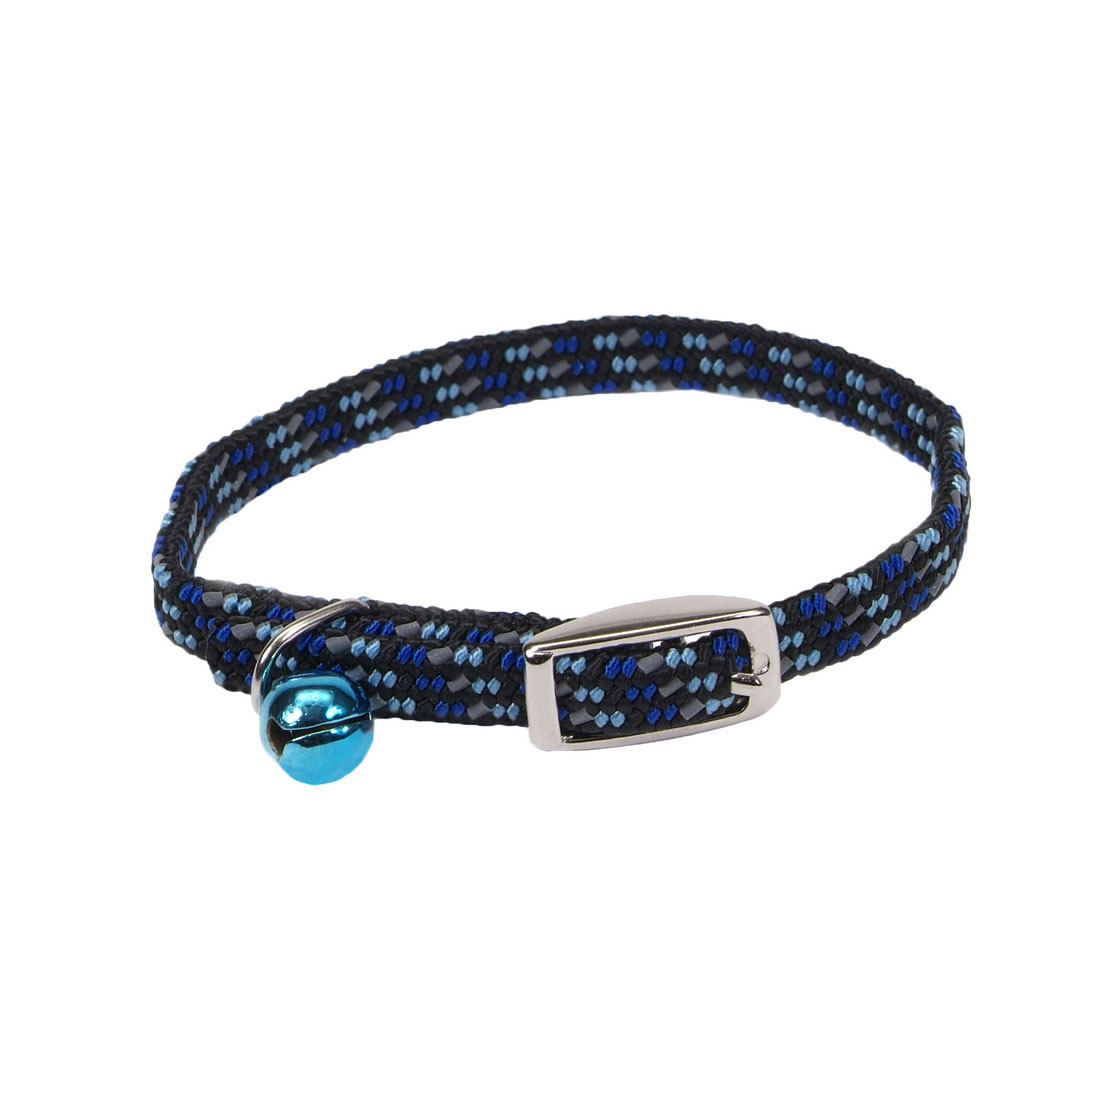 Li’l Pals Elasticated Safety Kitten Collar With Reflective Threads, Blue